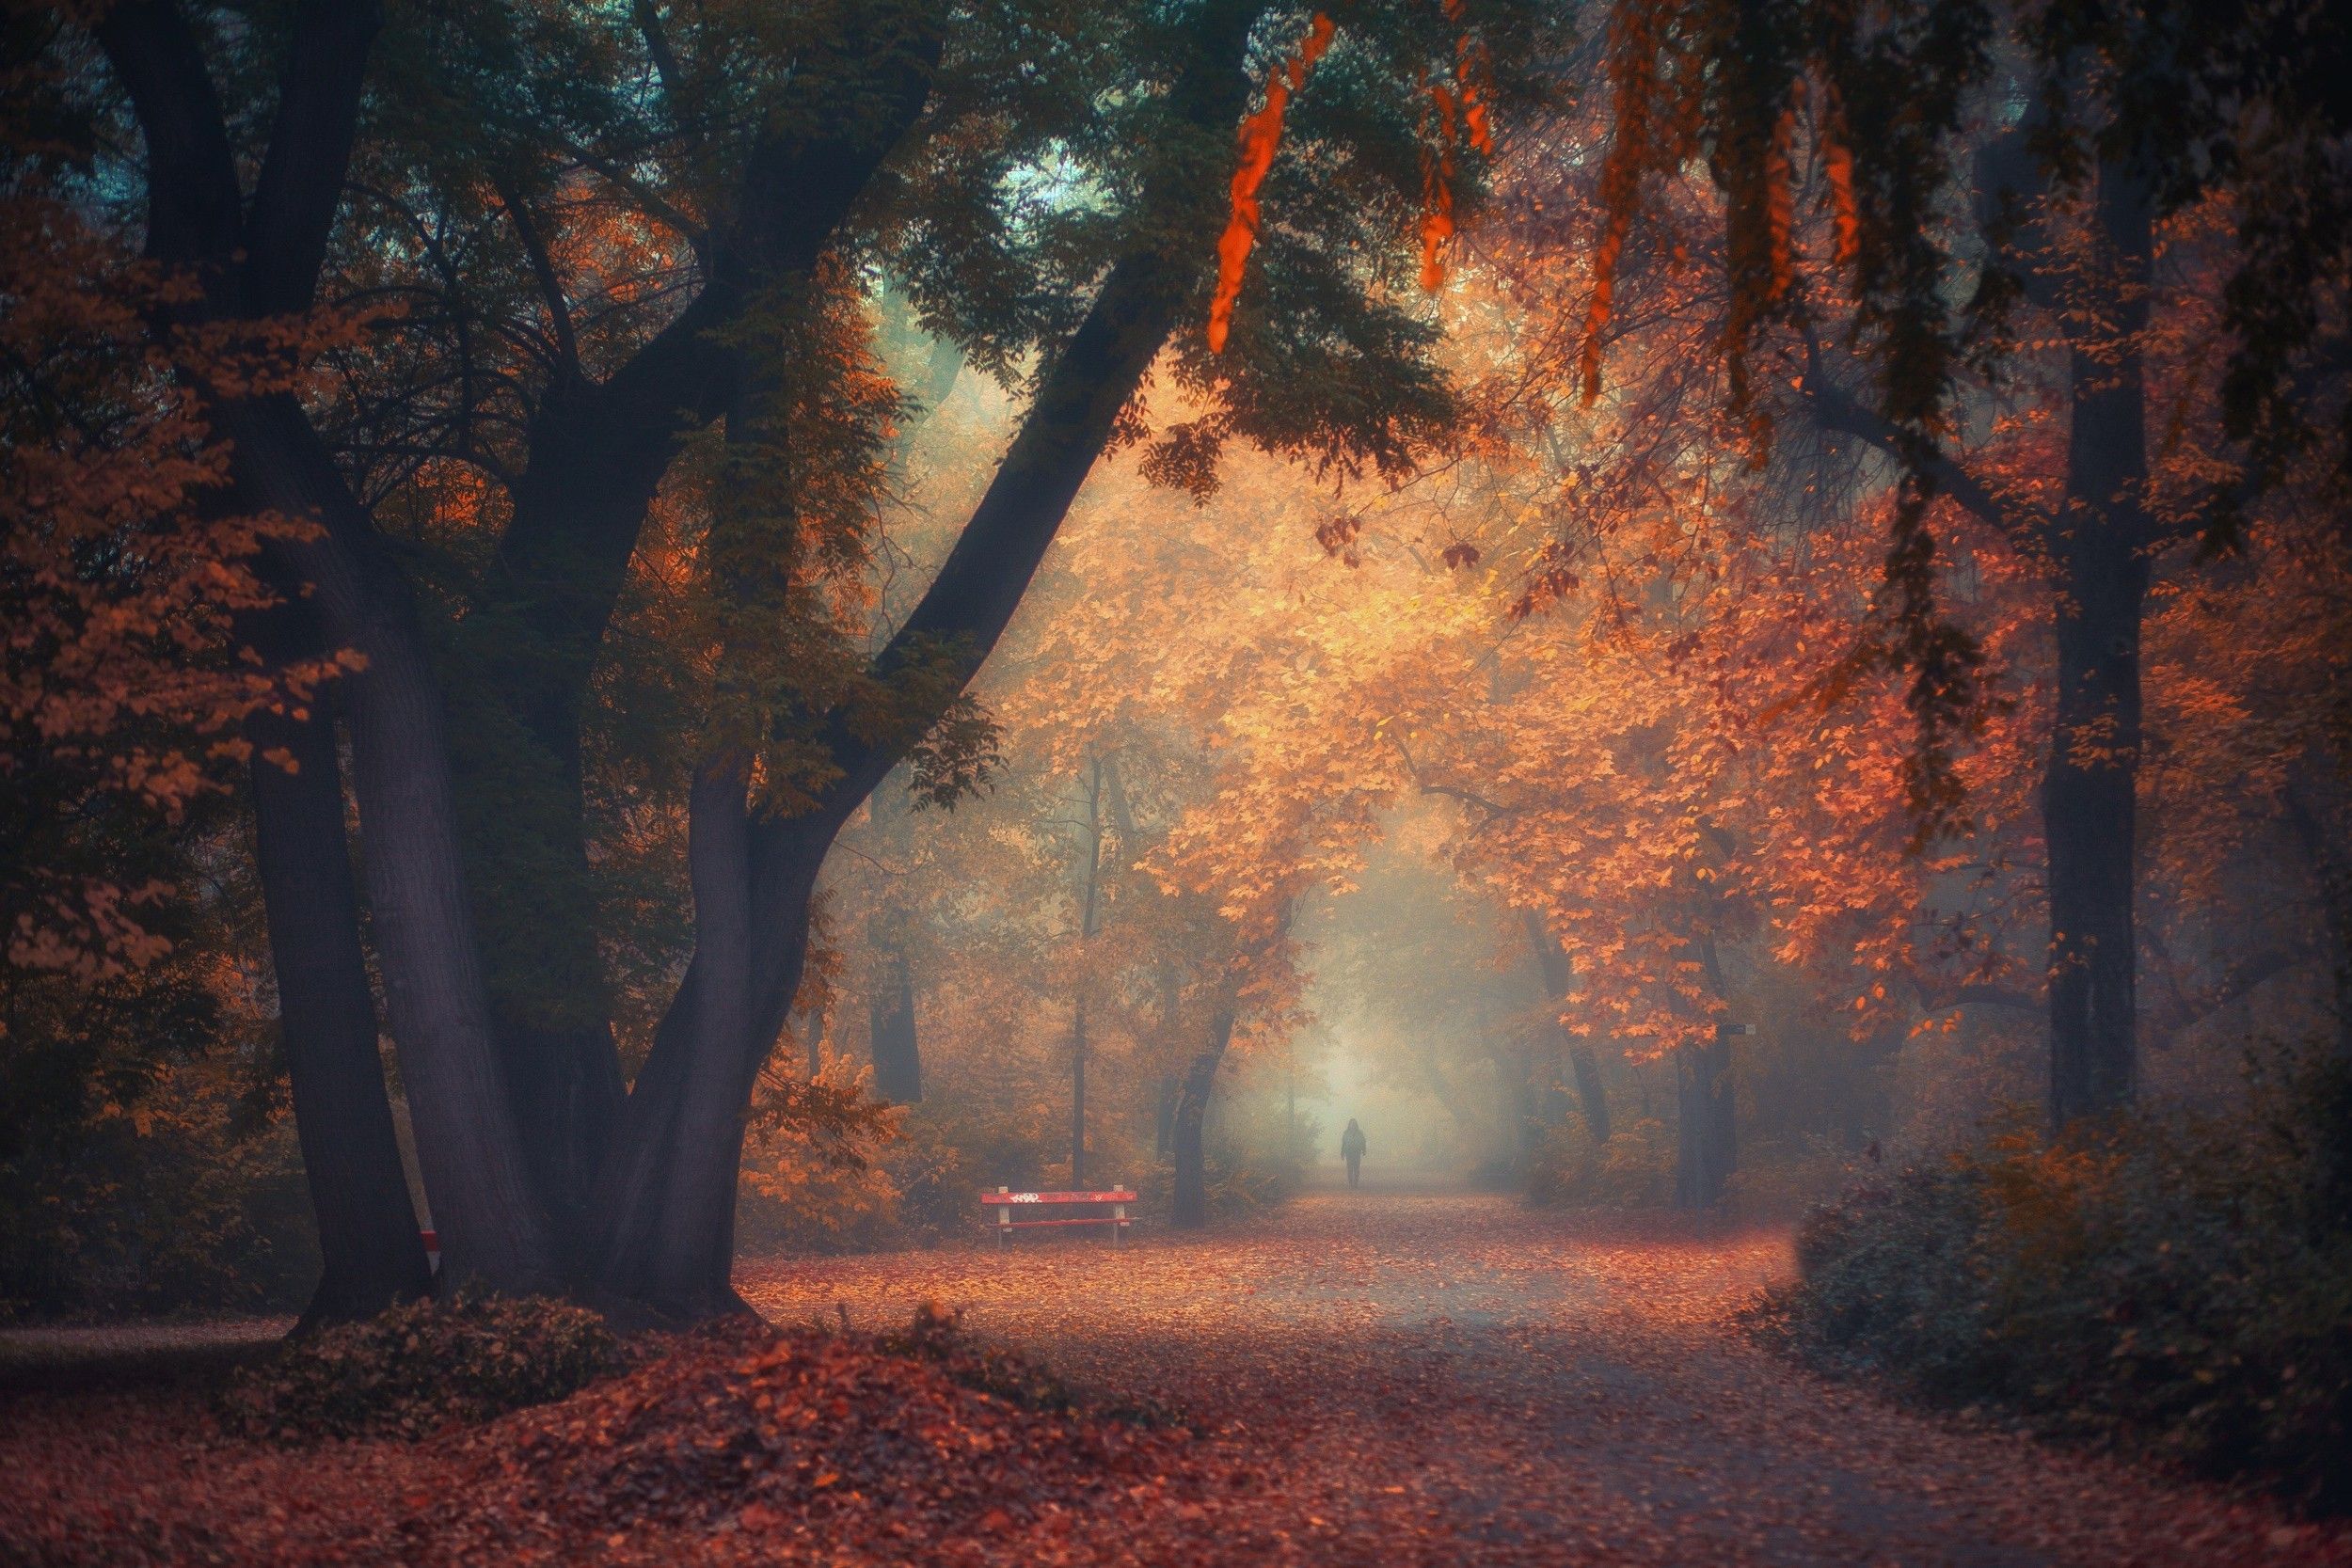 walking, Nature, Photography, Landscape, Park, Morning, Trees, Fall, Path, Bench, Leaves, Mist, Atmosphere, Netherlands Wallpaper HD / Desktop and Mobile Background